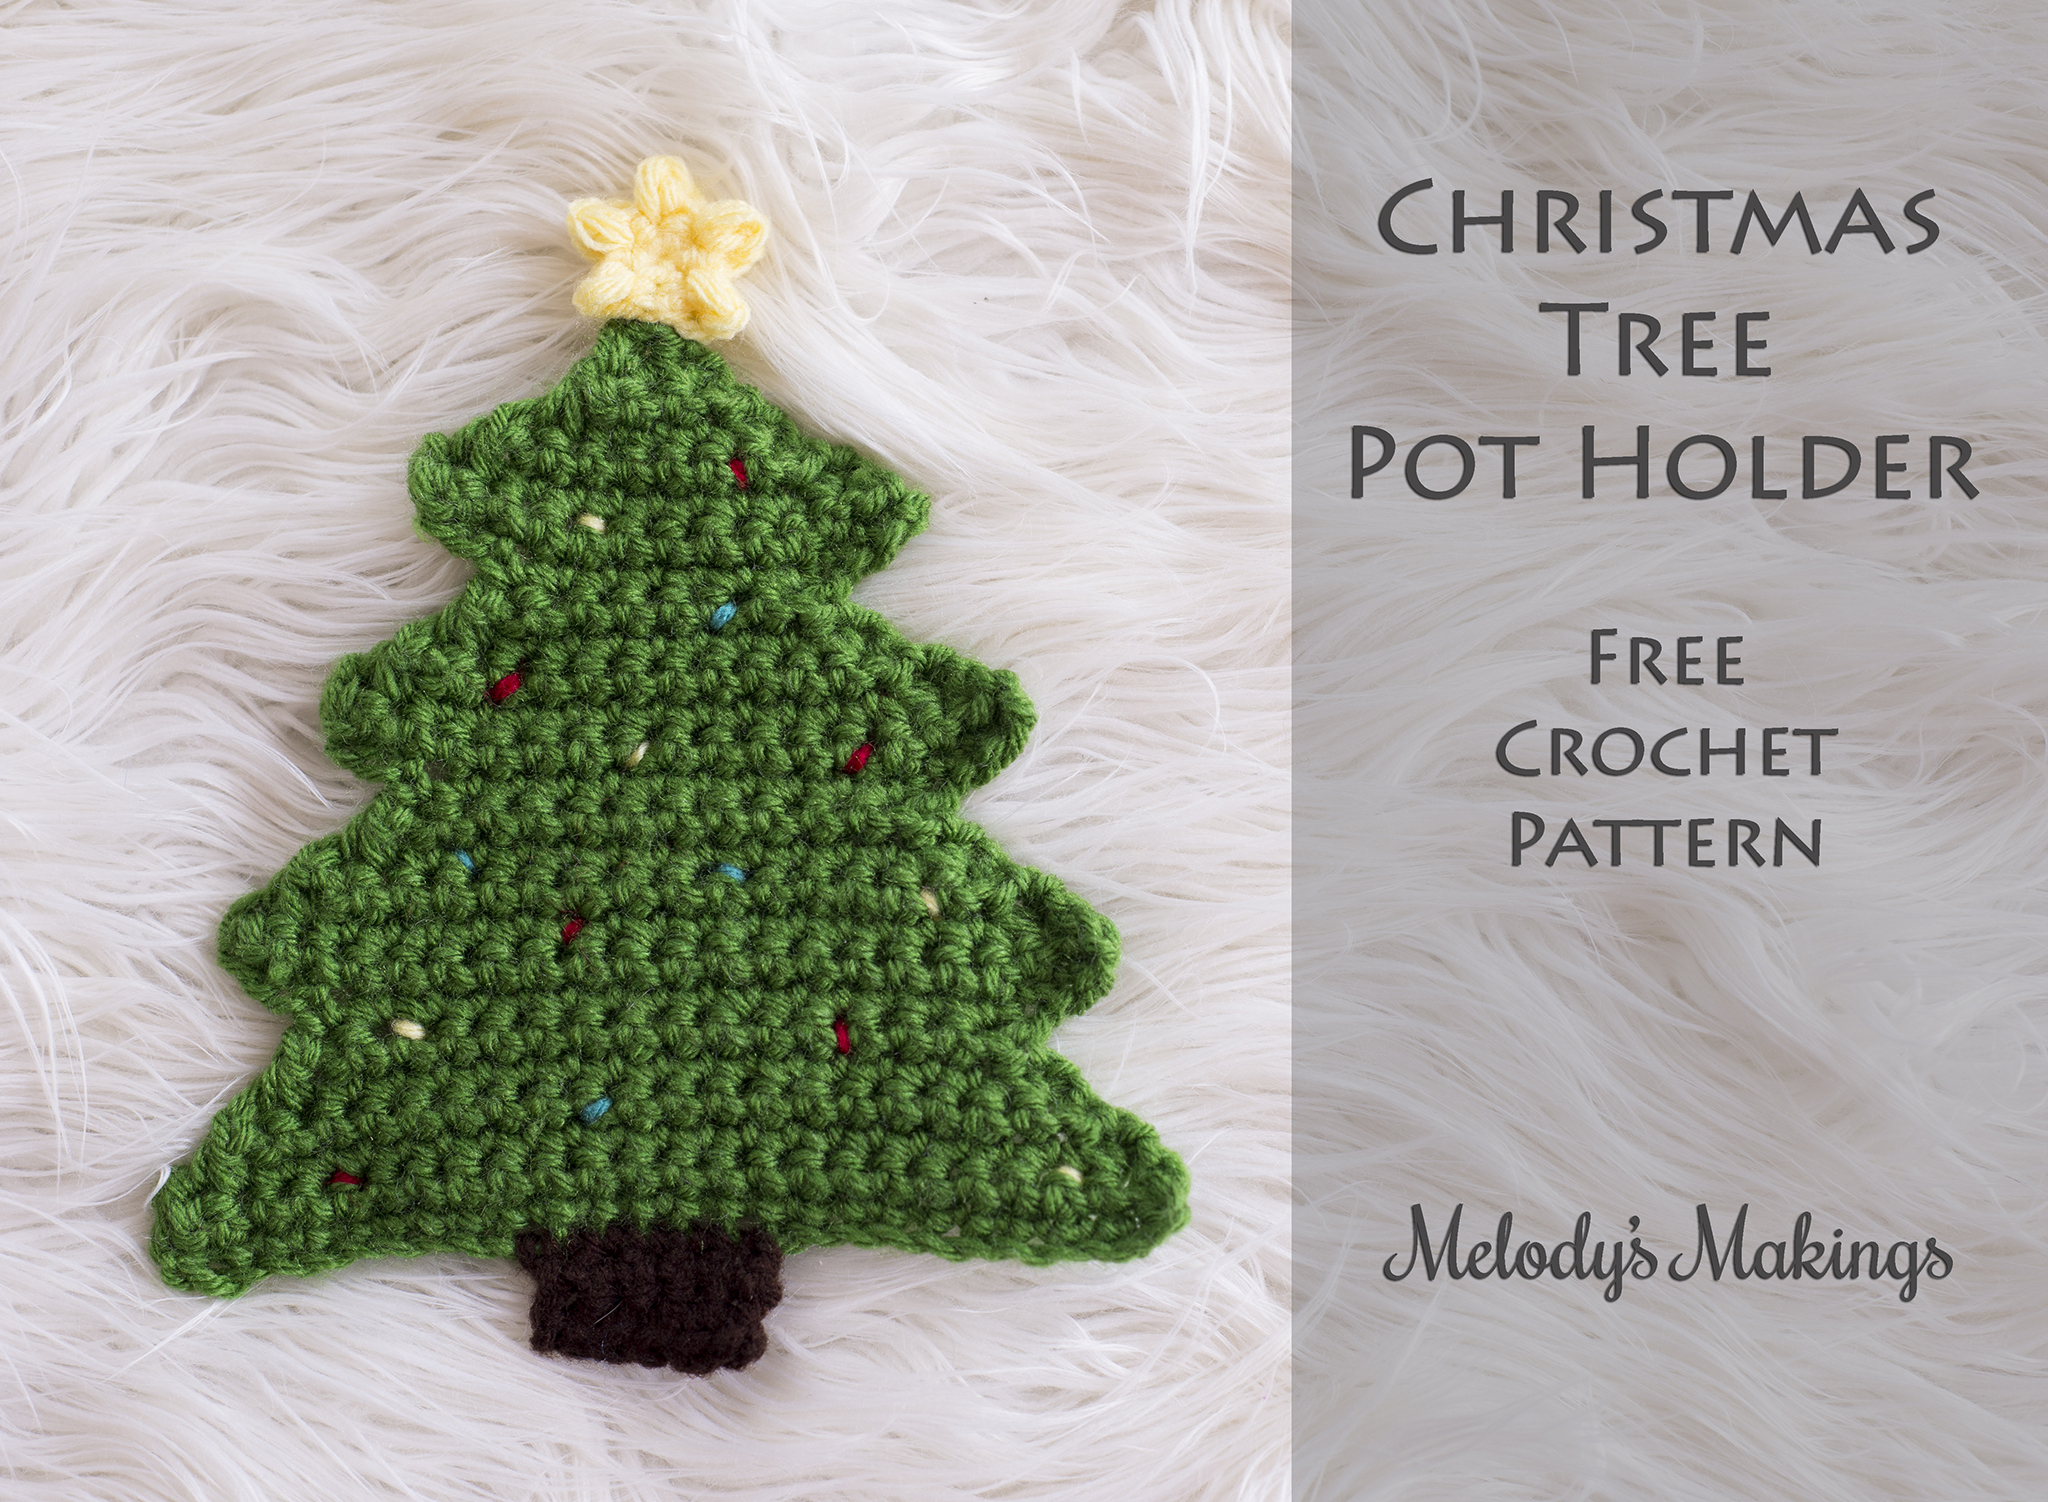 Free Knitted Christmas Tree Decorations Patterns Christmas Tree Pot Holder Pattern Crochet Knit Melodys Makings